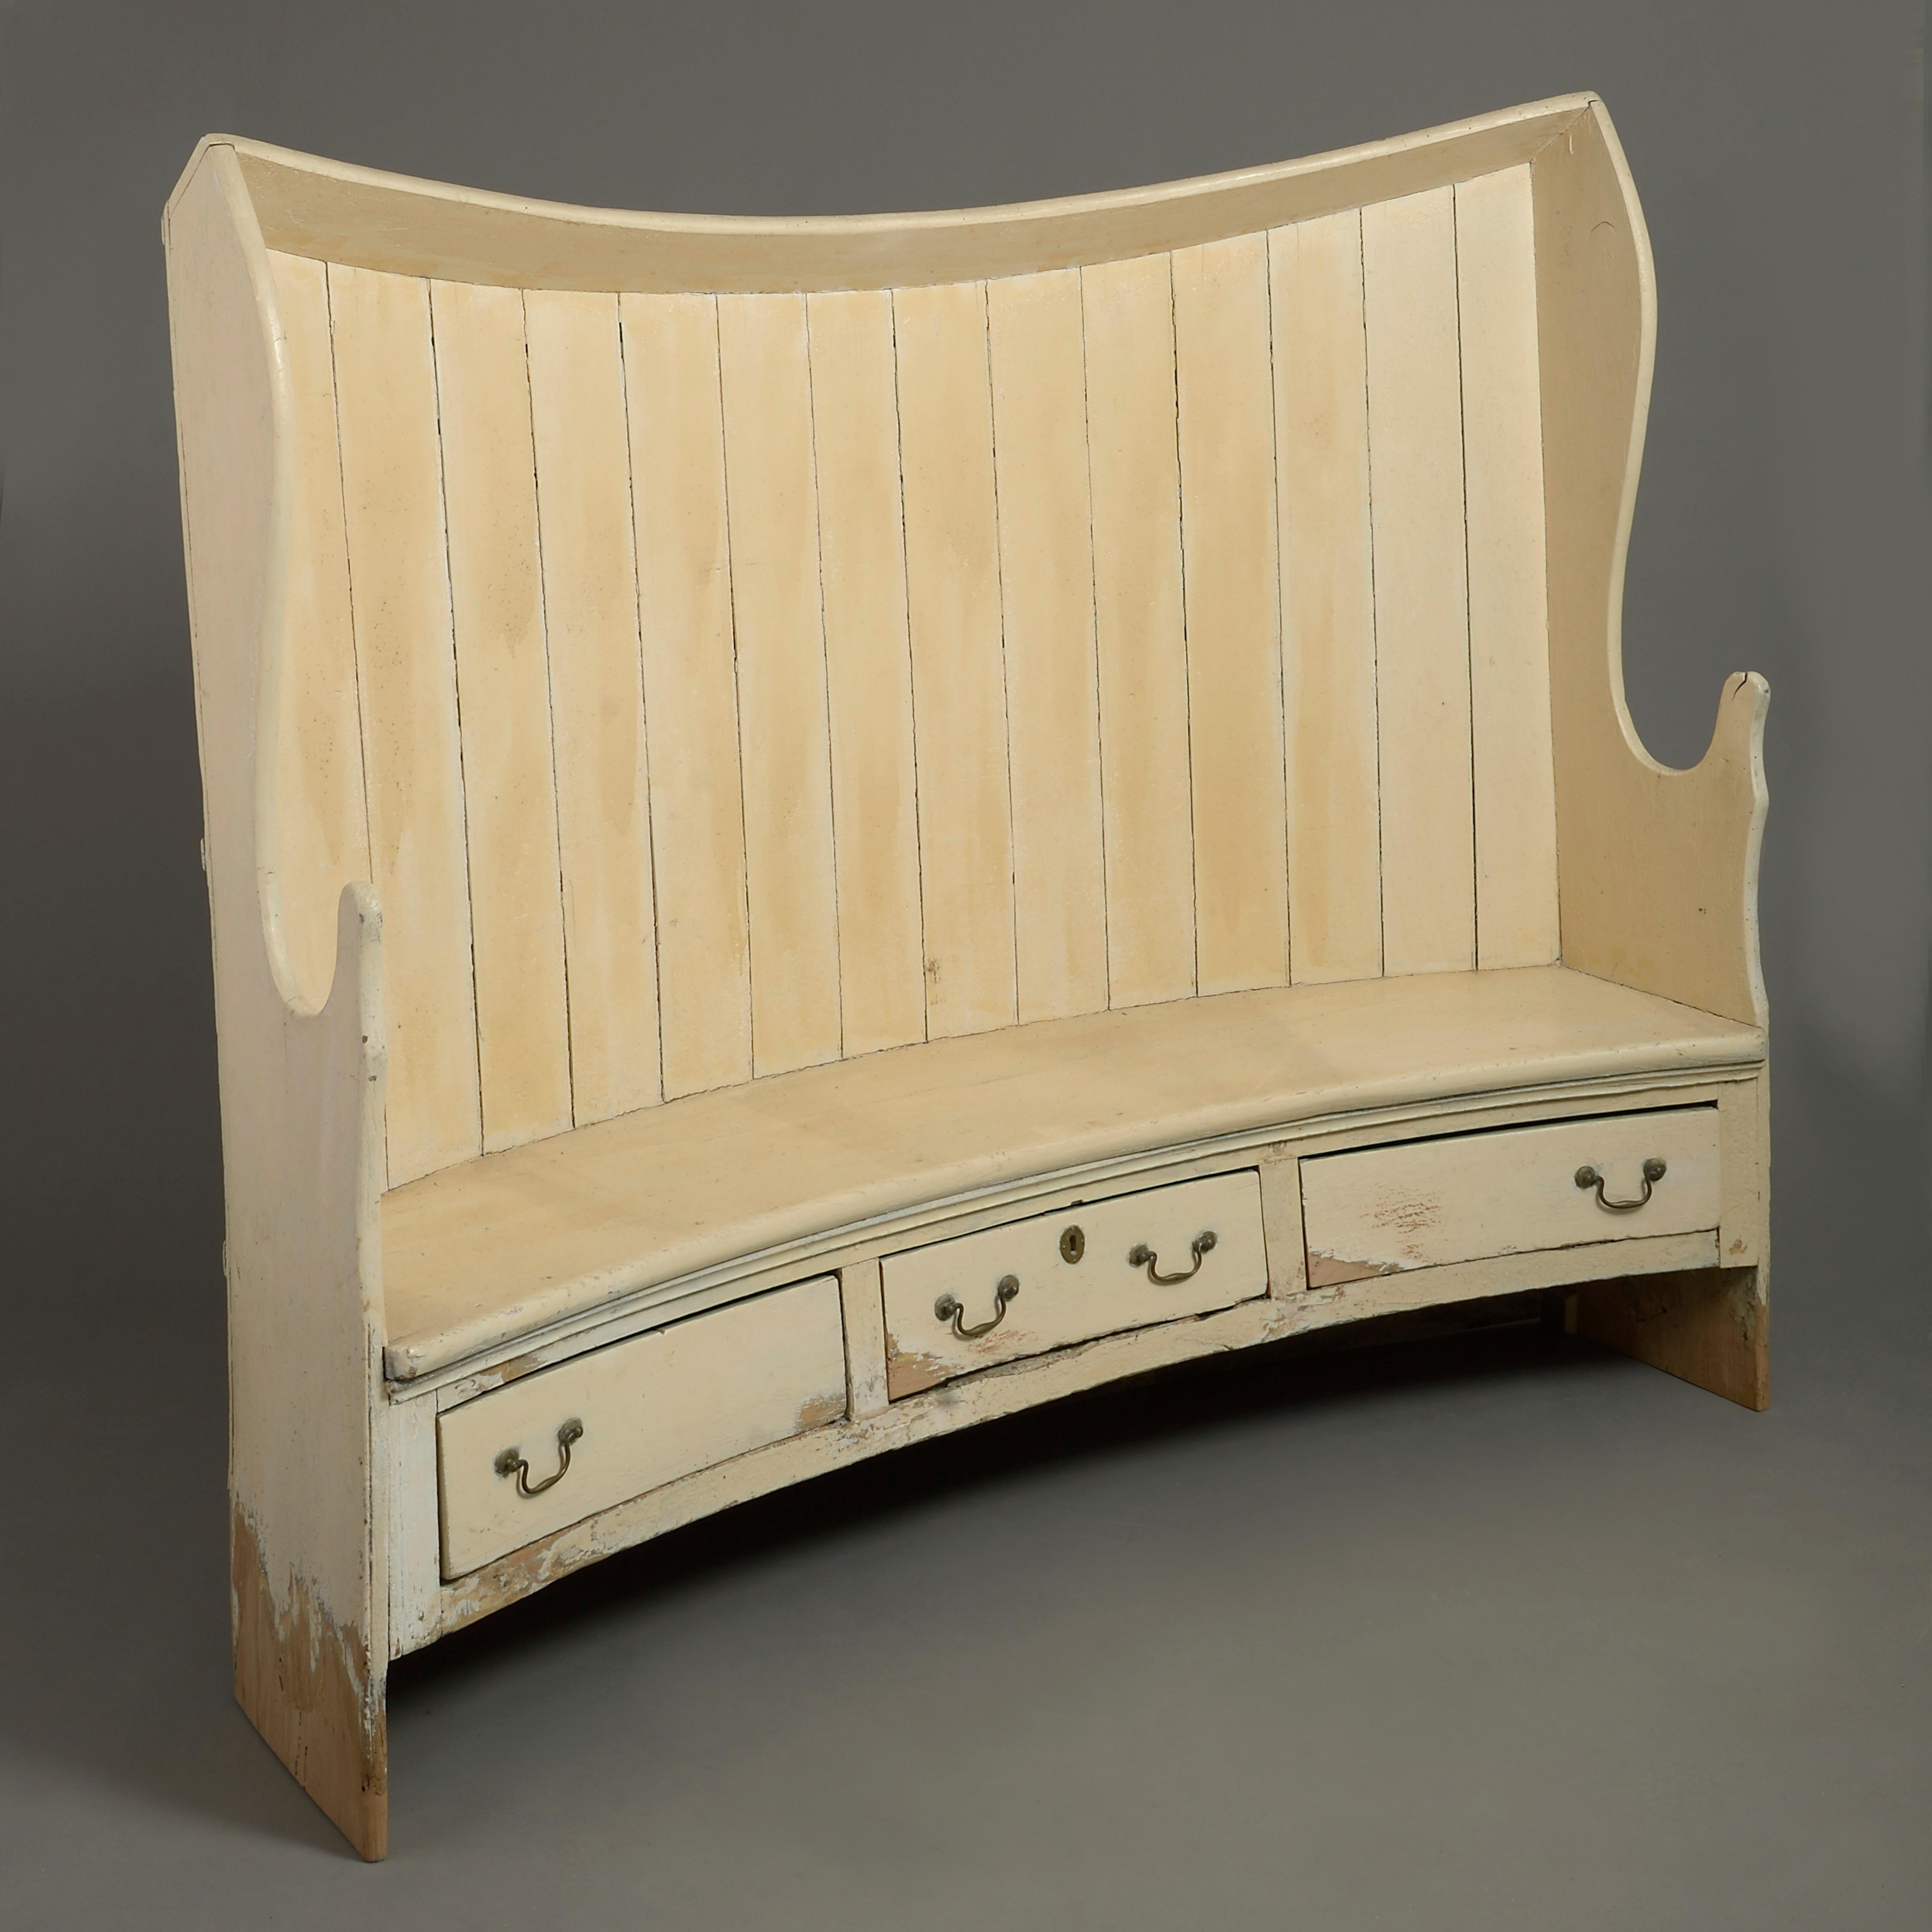 A charming late 18th century cream painted settle, the curved boarded back having shaped arm rests, the bench seat raised upon three drawers with brass swan neck handles.